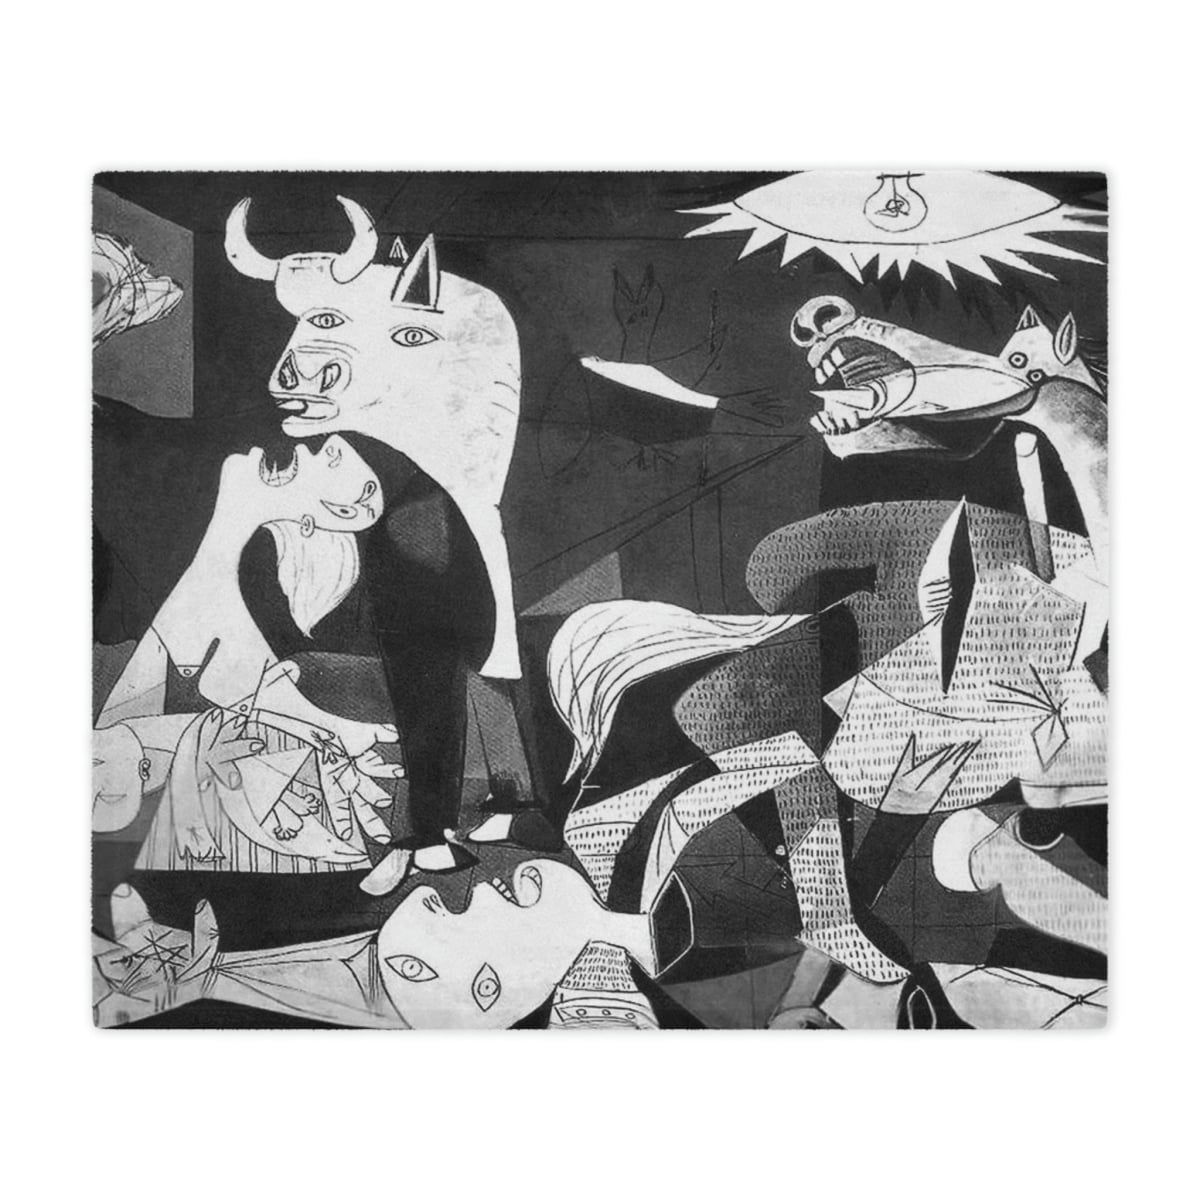 Pablo Picasso Guernica Art Blanket: Iconic Masterpiece for Your Home